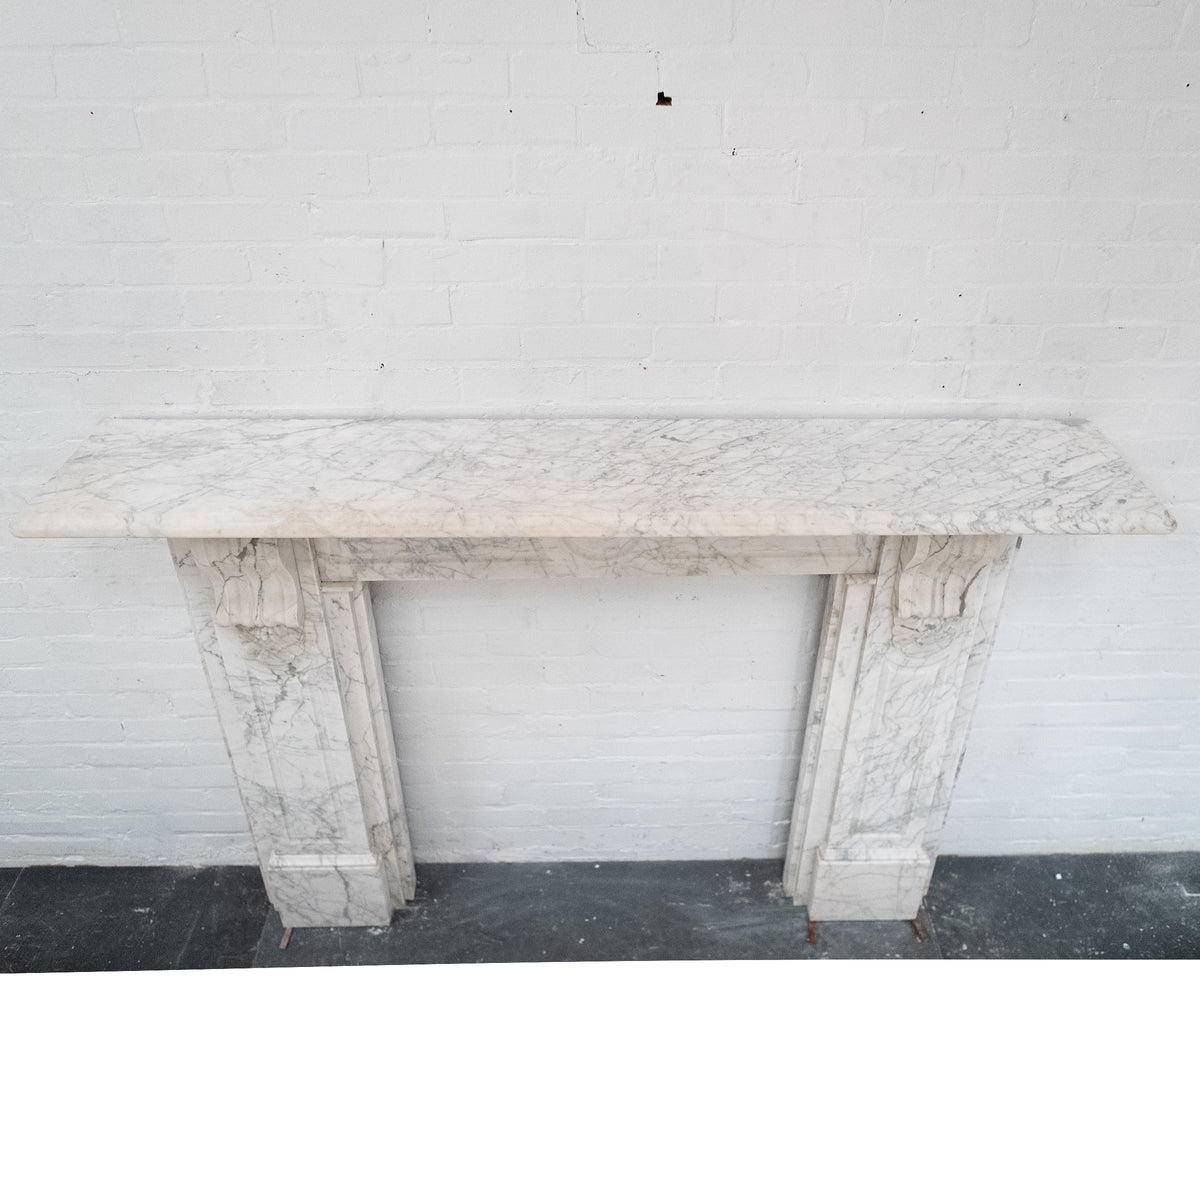 Large Antique Marble Surround with Corbels | The Architectural Forum